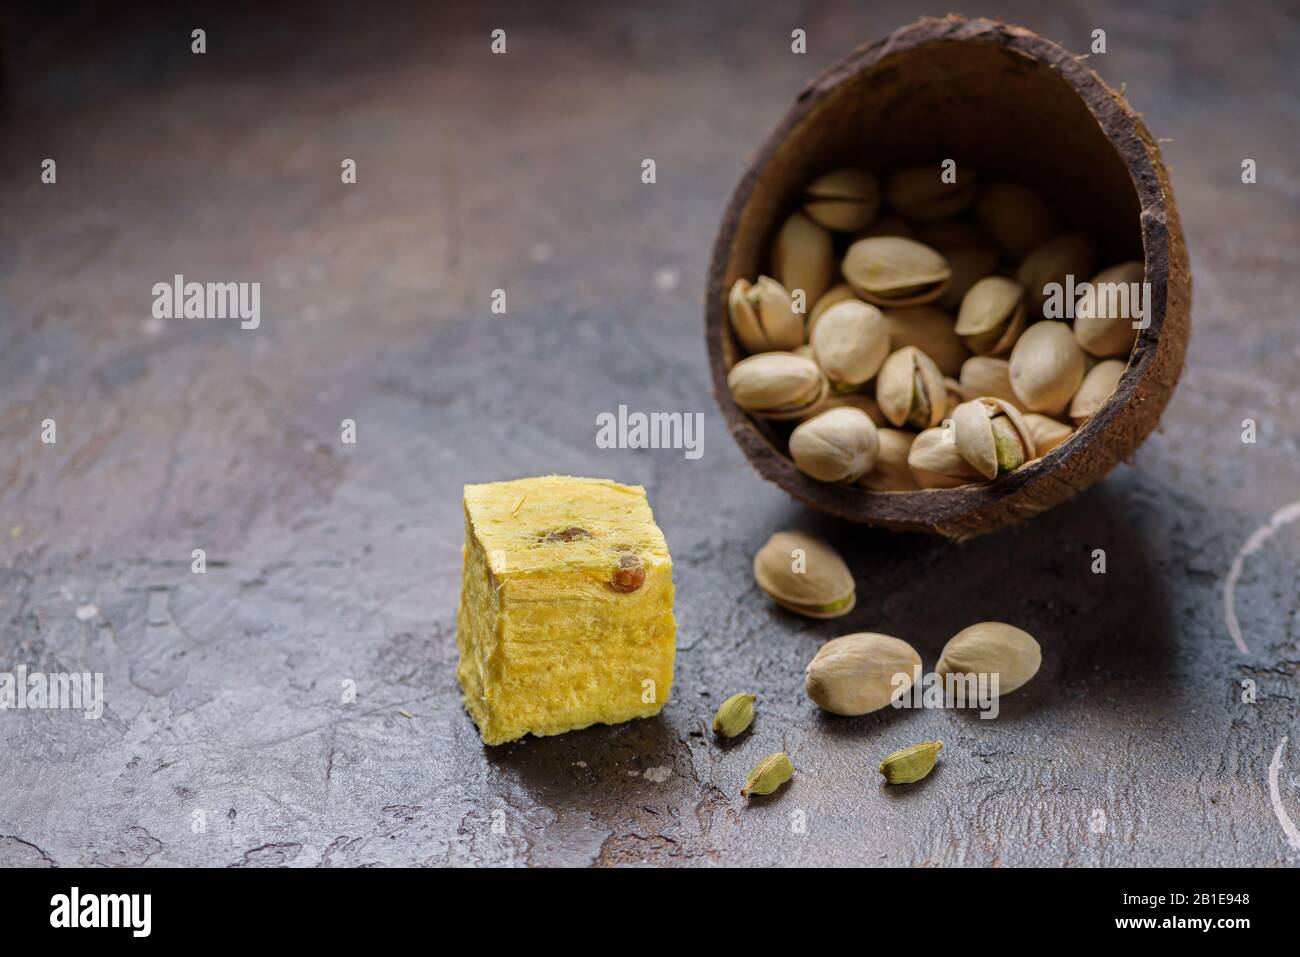 One cube of dessert soan papdi, cardamom grains and pistachios on concrete kitchen worktop.. Stock Photo